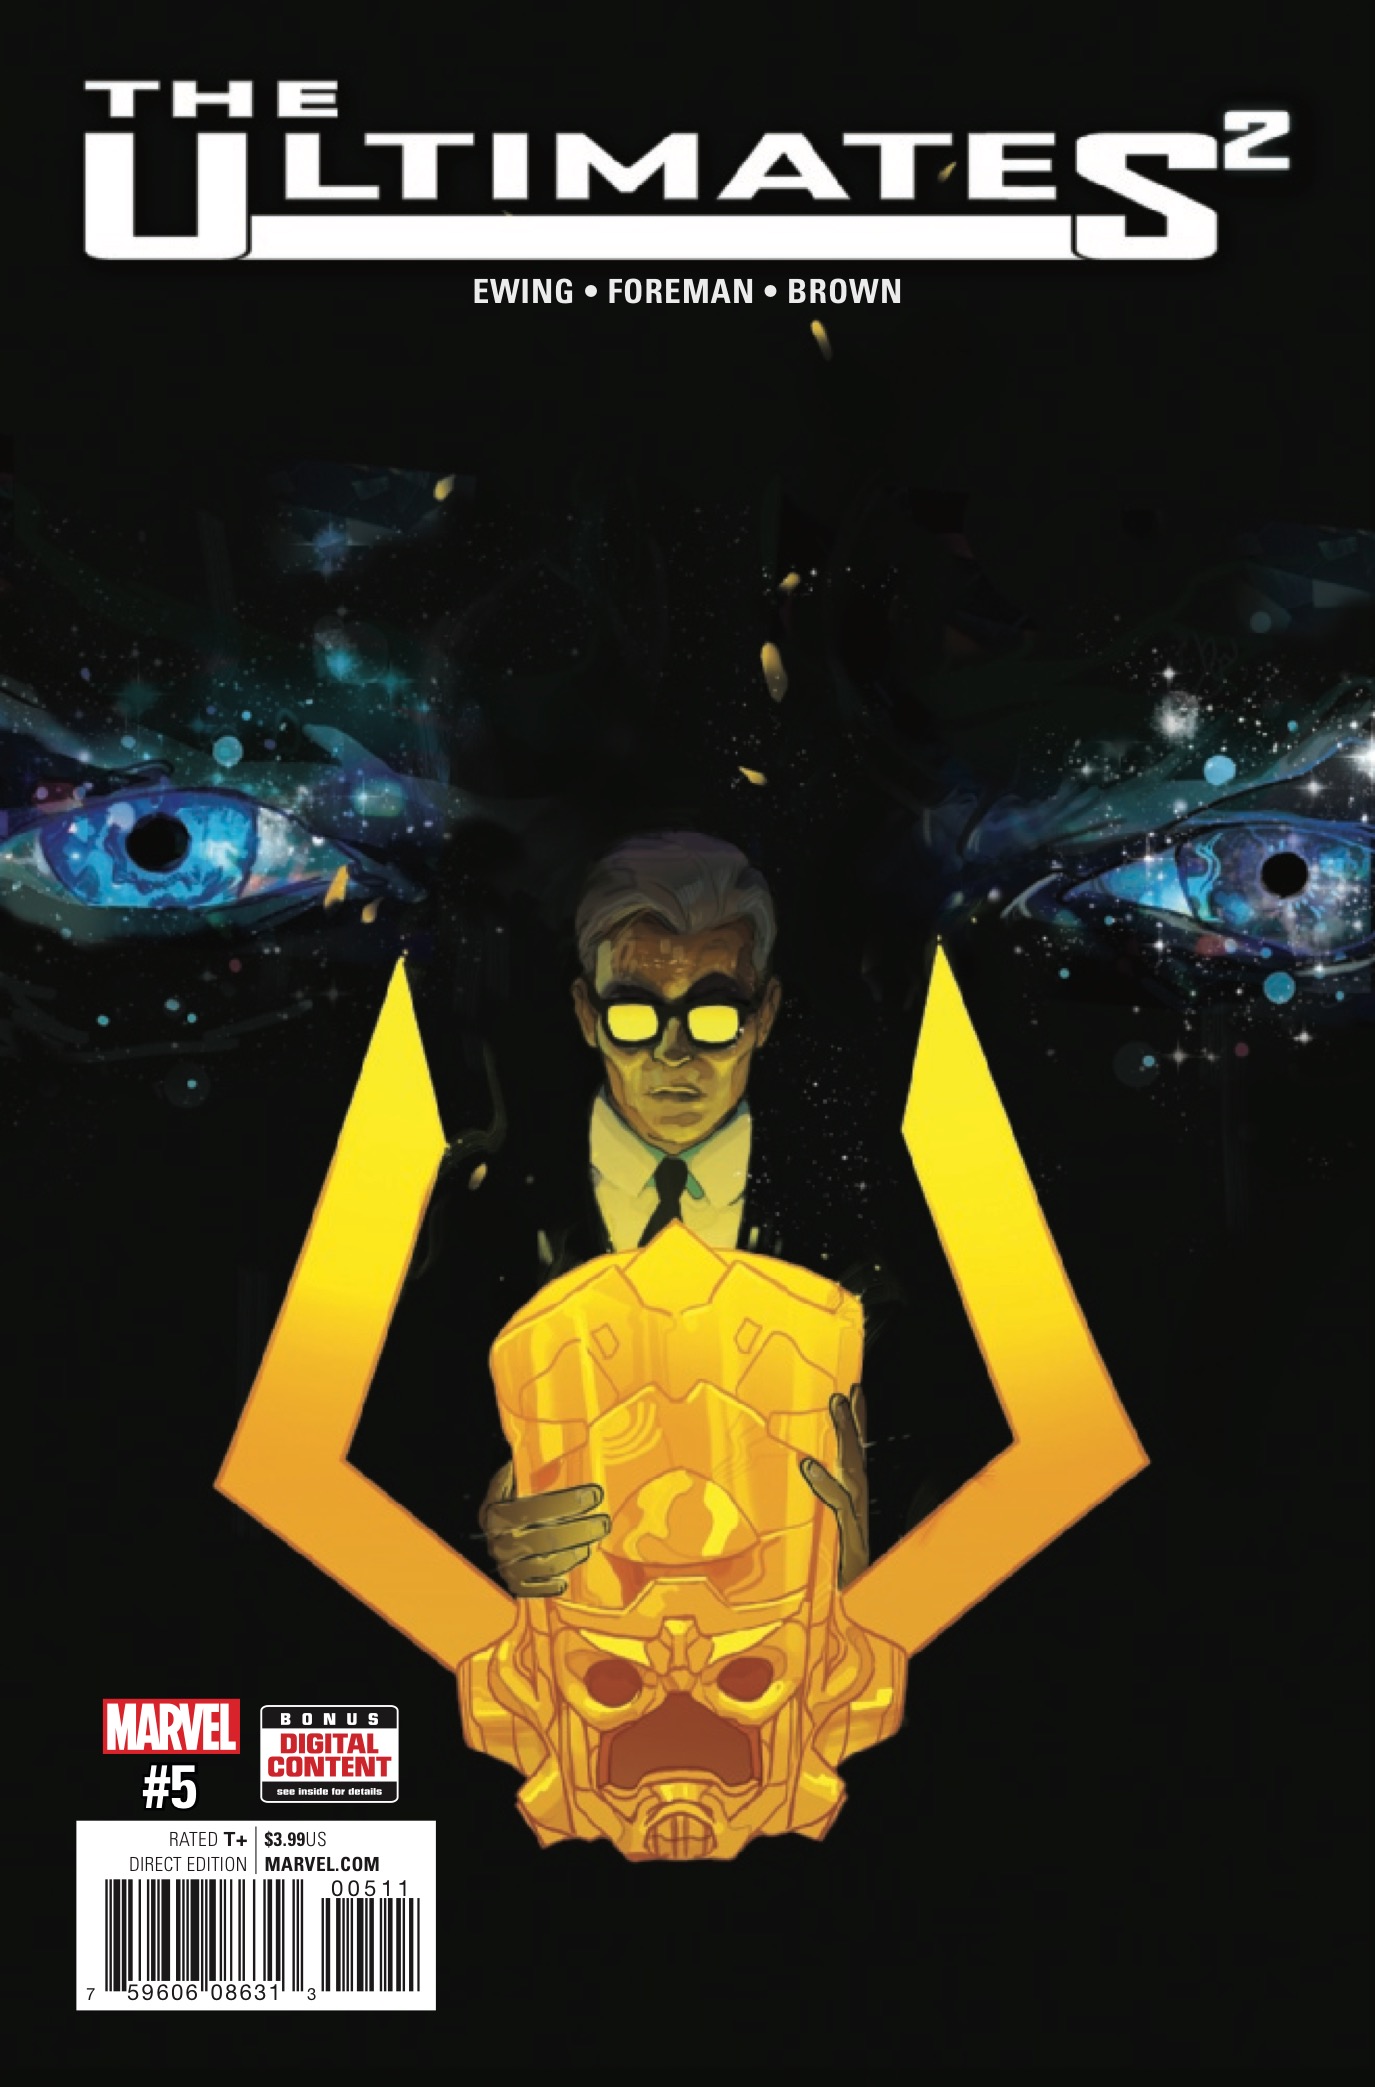 Ultimates2 #5 Review